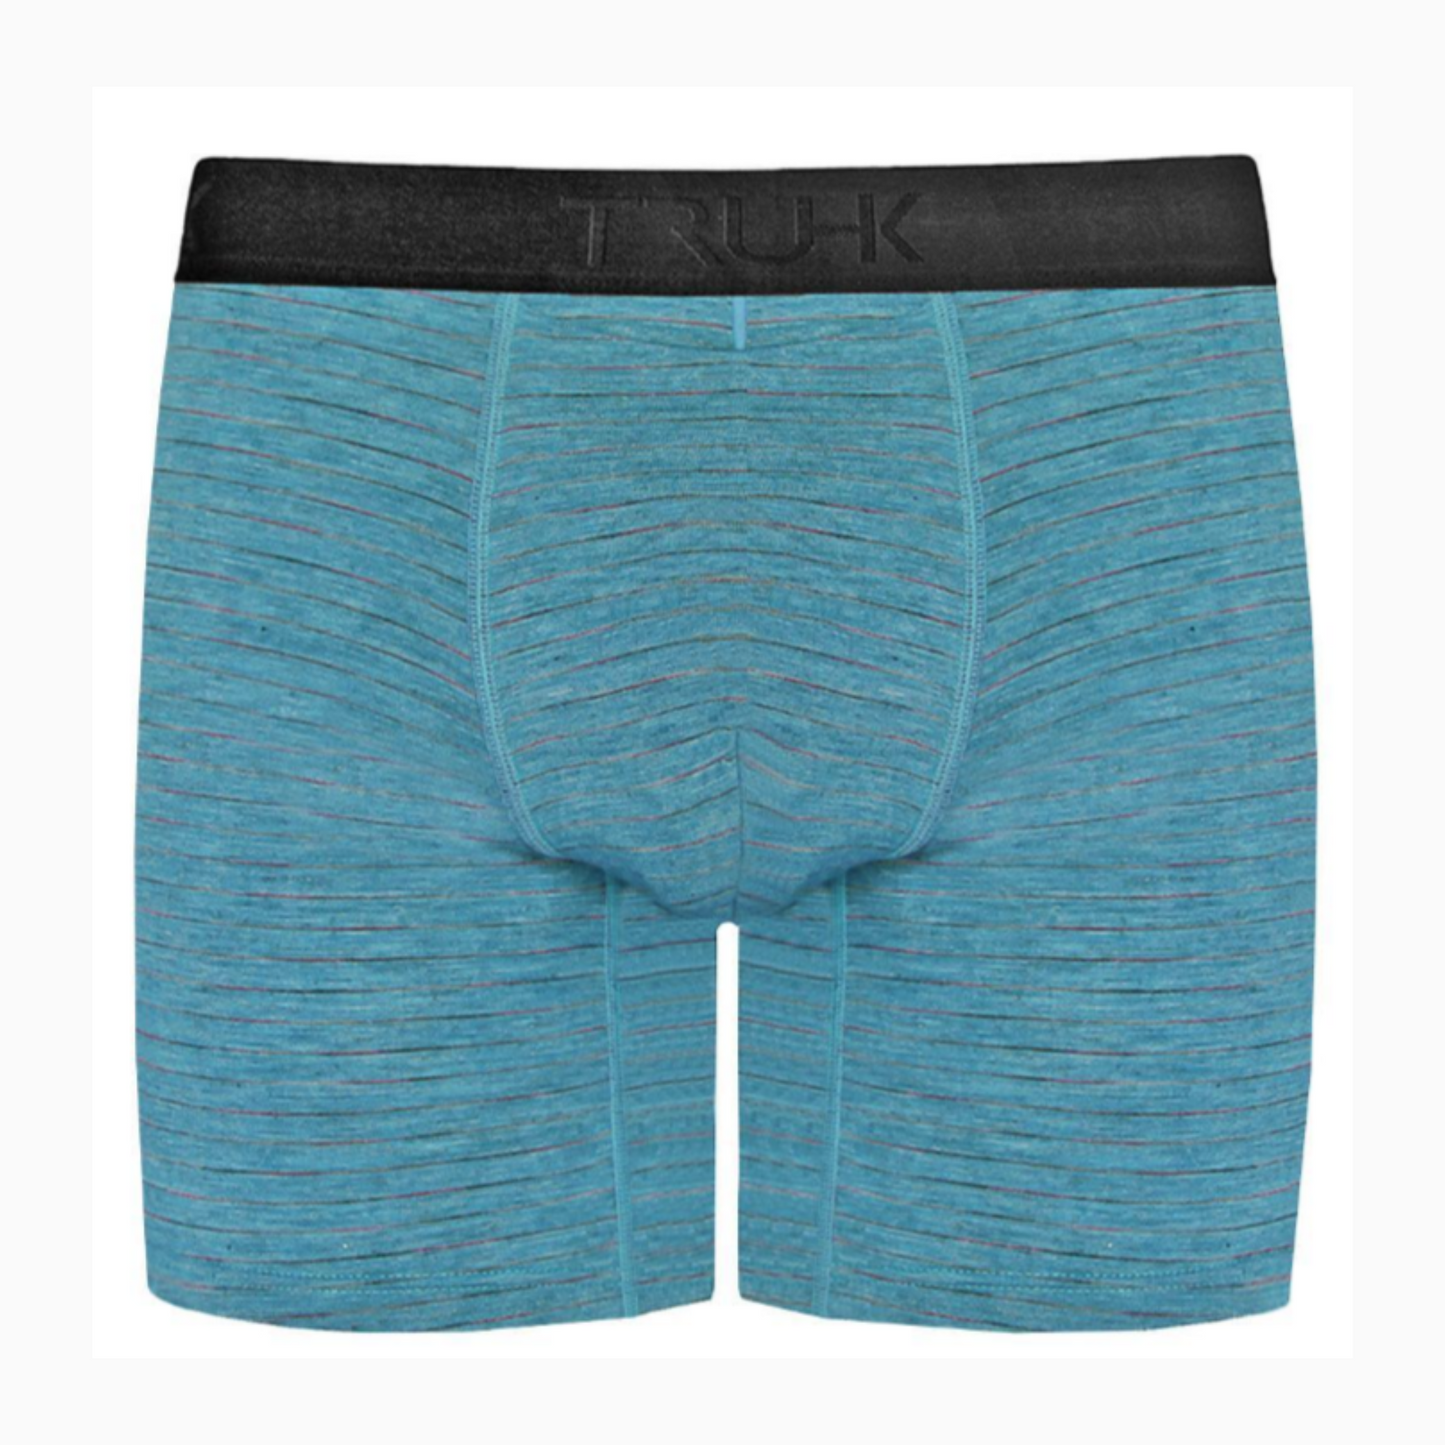 TRUHK - Turquoise Pouch Front Boxer STP/Packing Underwear